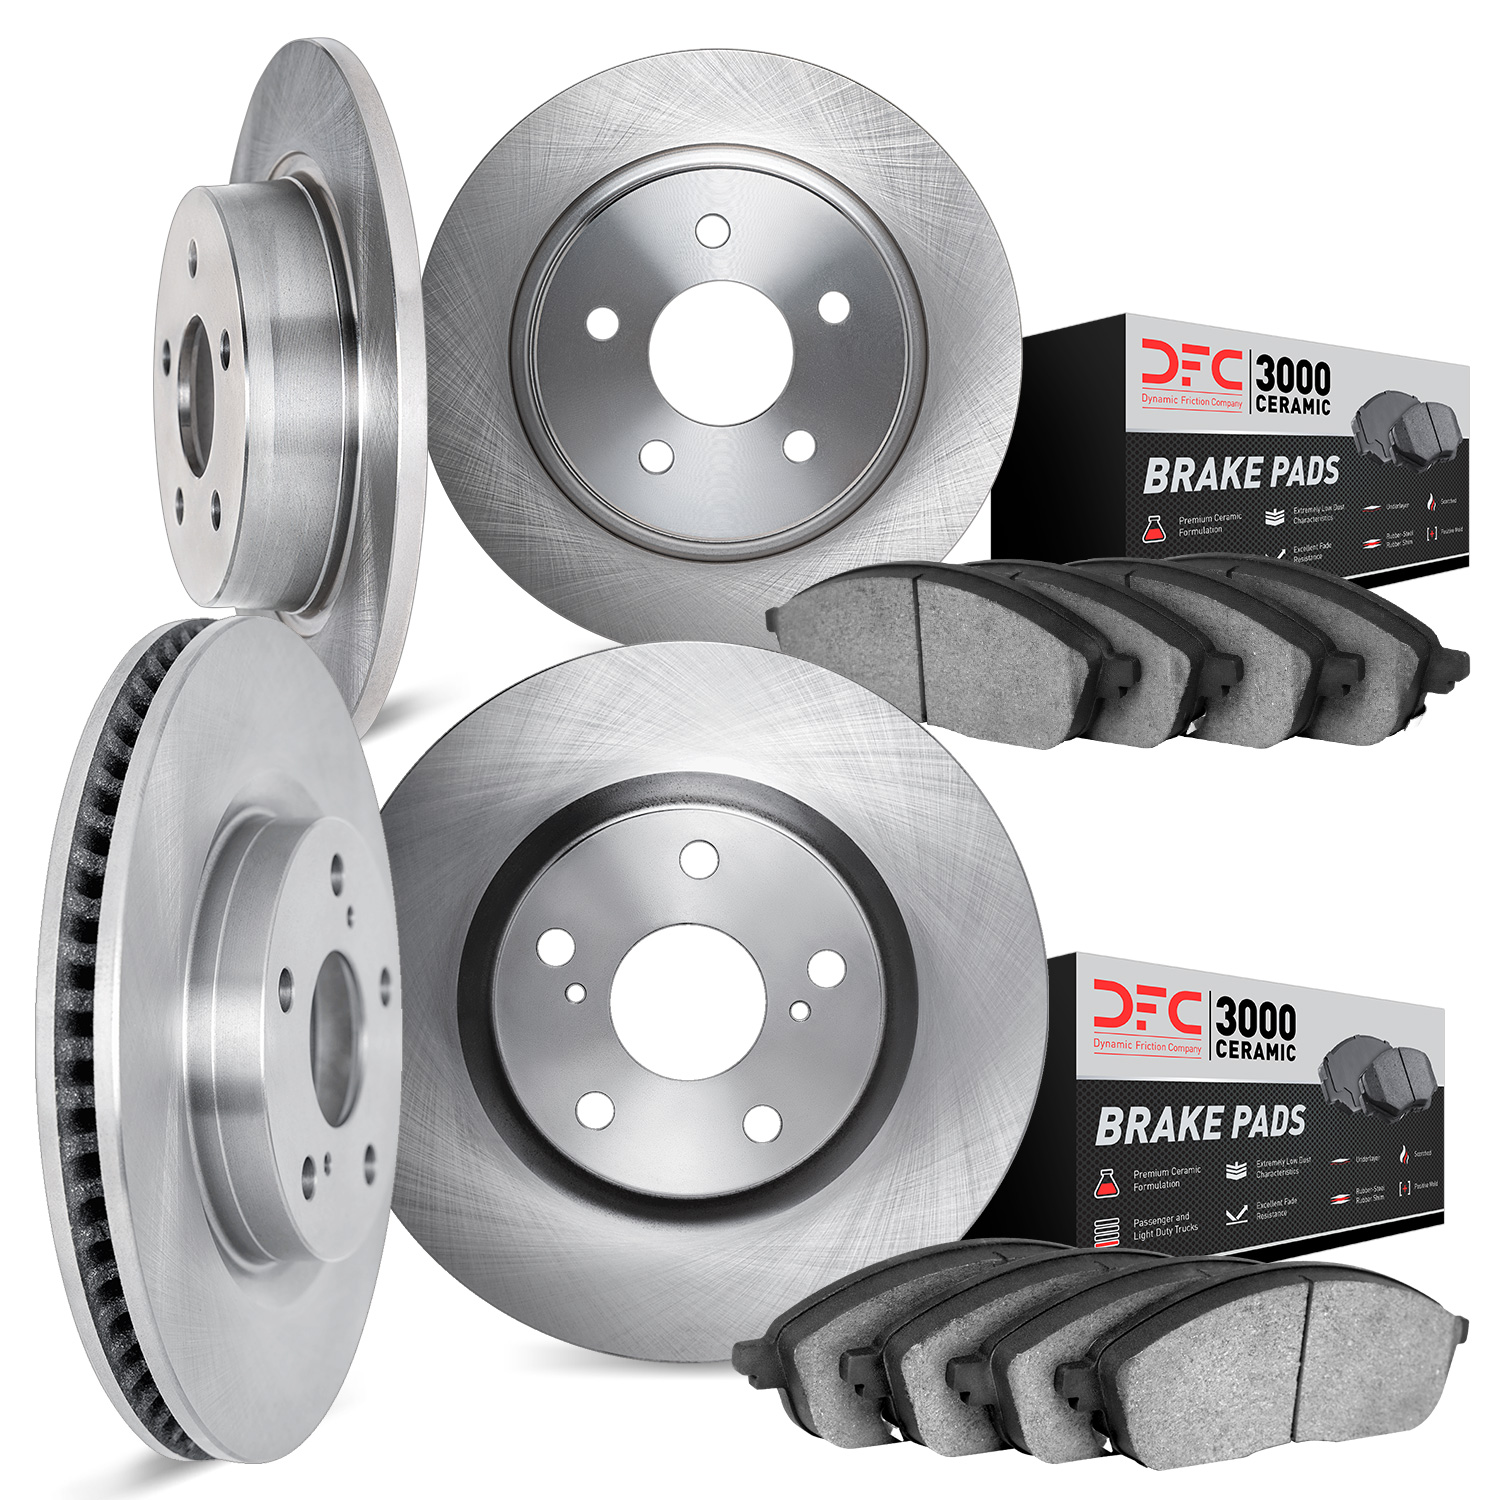 6304-76049 Brake Rotors with 3000-Series Ceramic Brake Pads Kit, 2001-2003 Lexus/Toyota/Scion, Position: Front and Rear